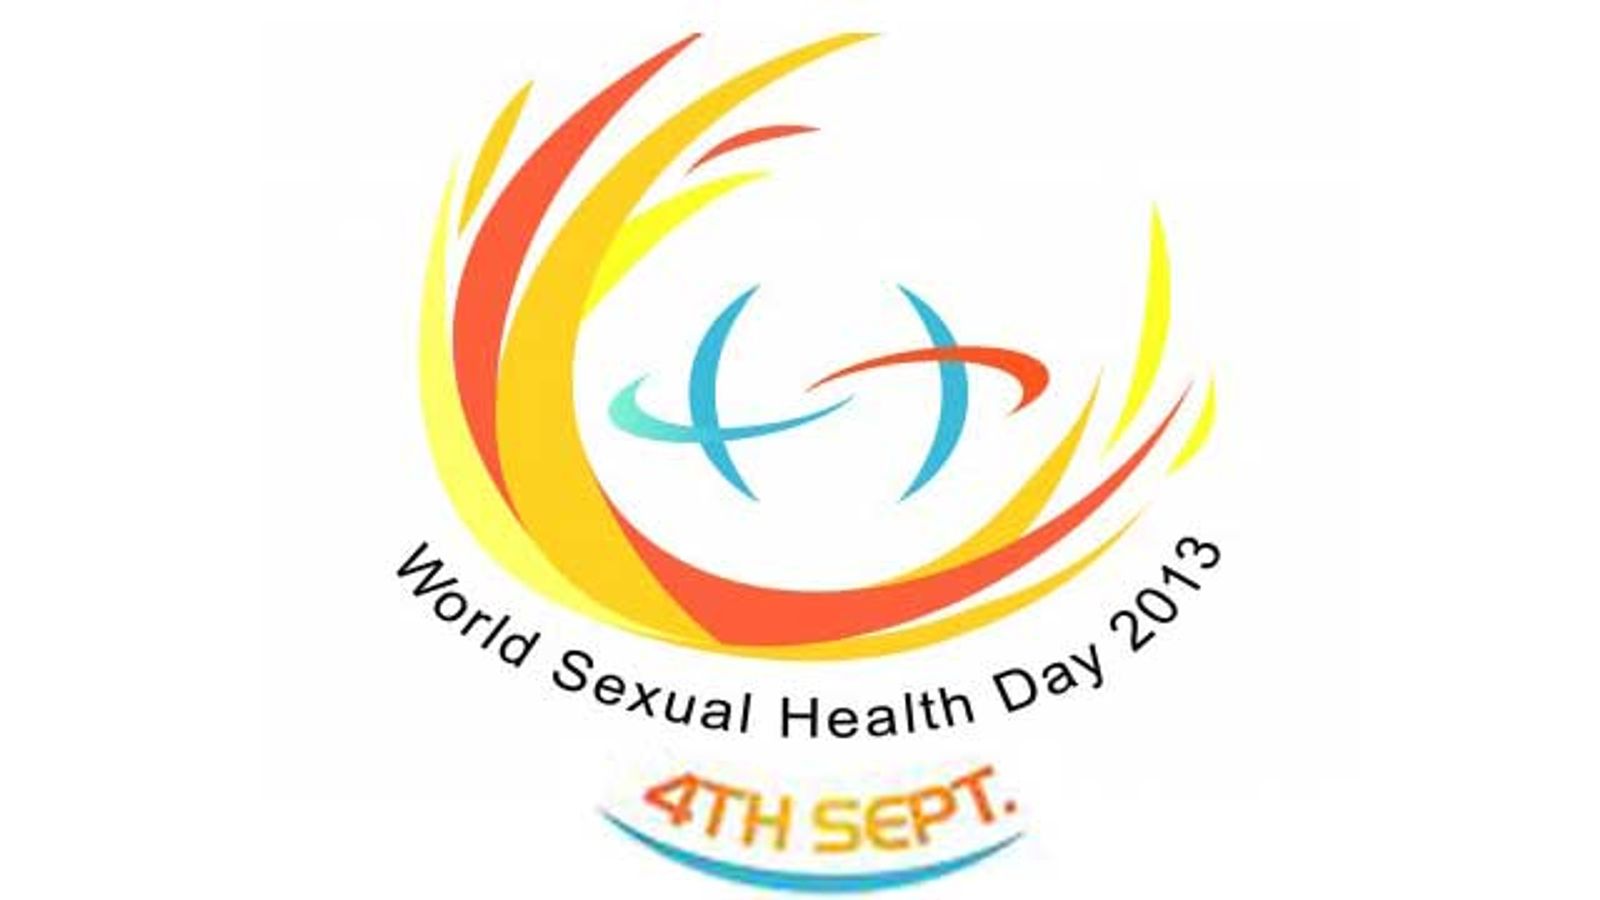 Yesterday Was World Sexual Health Day—Who Knew?